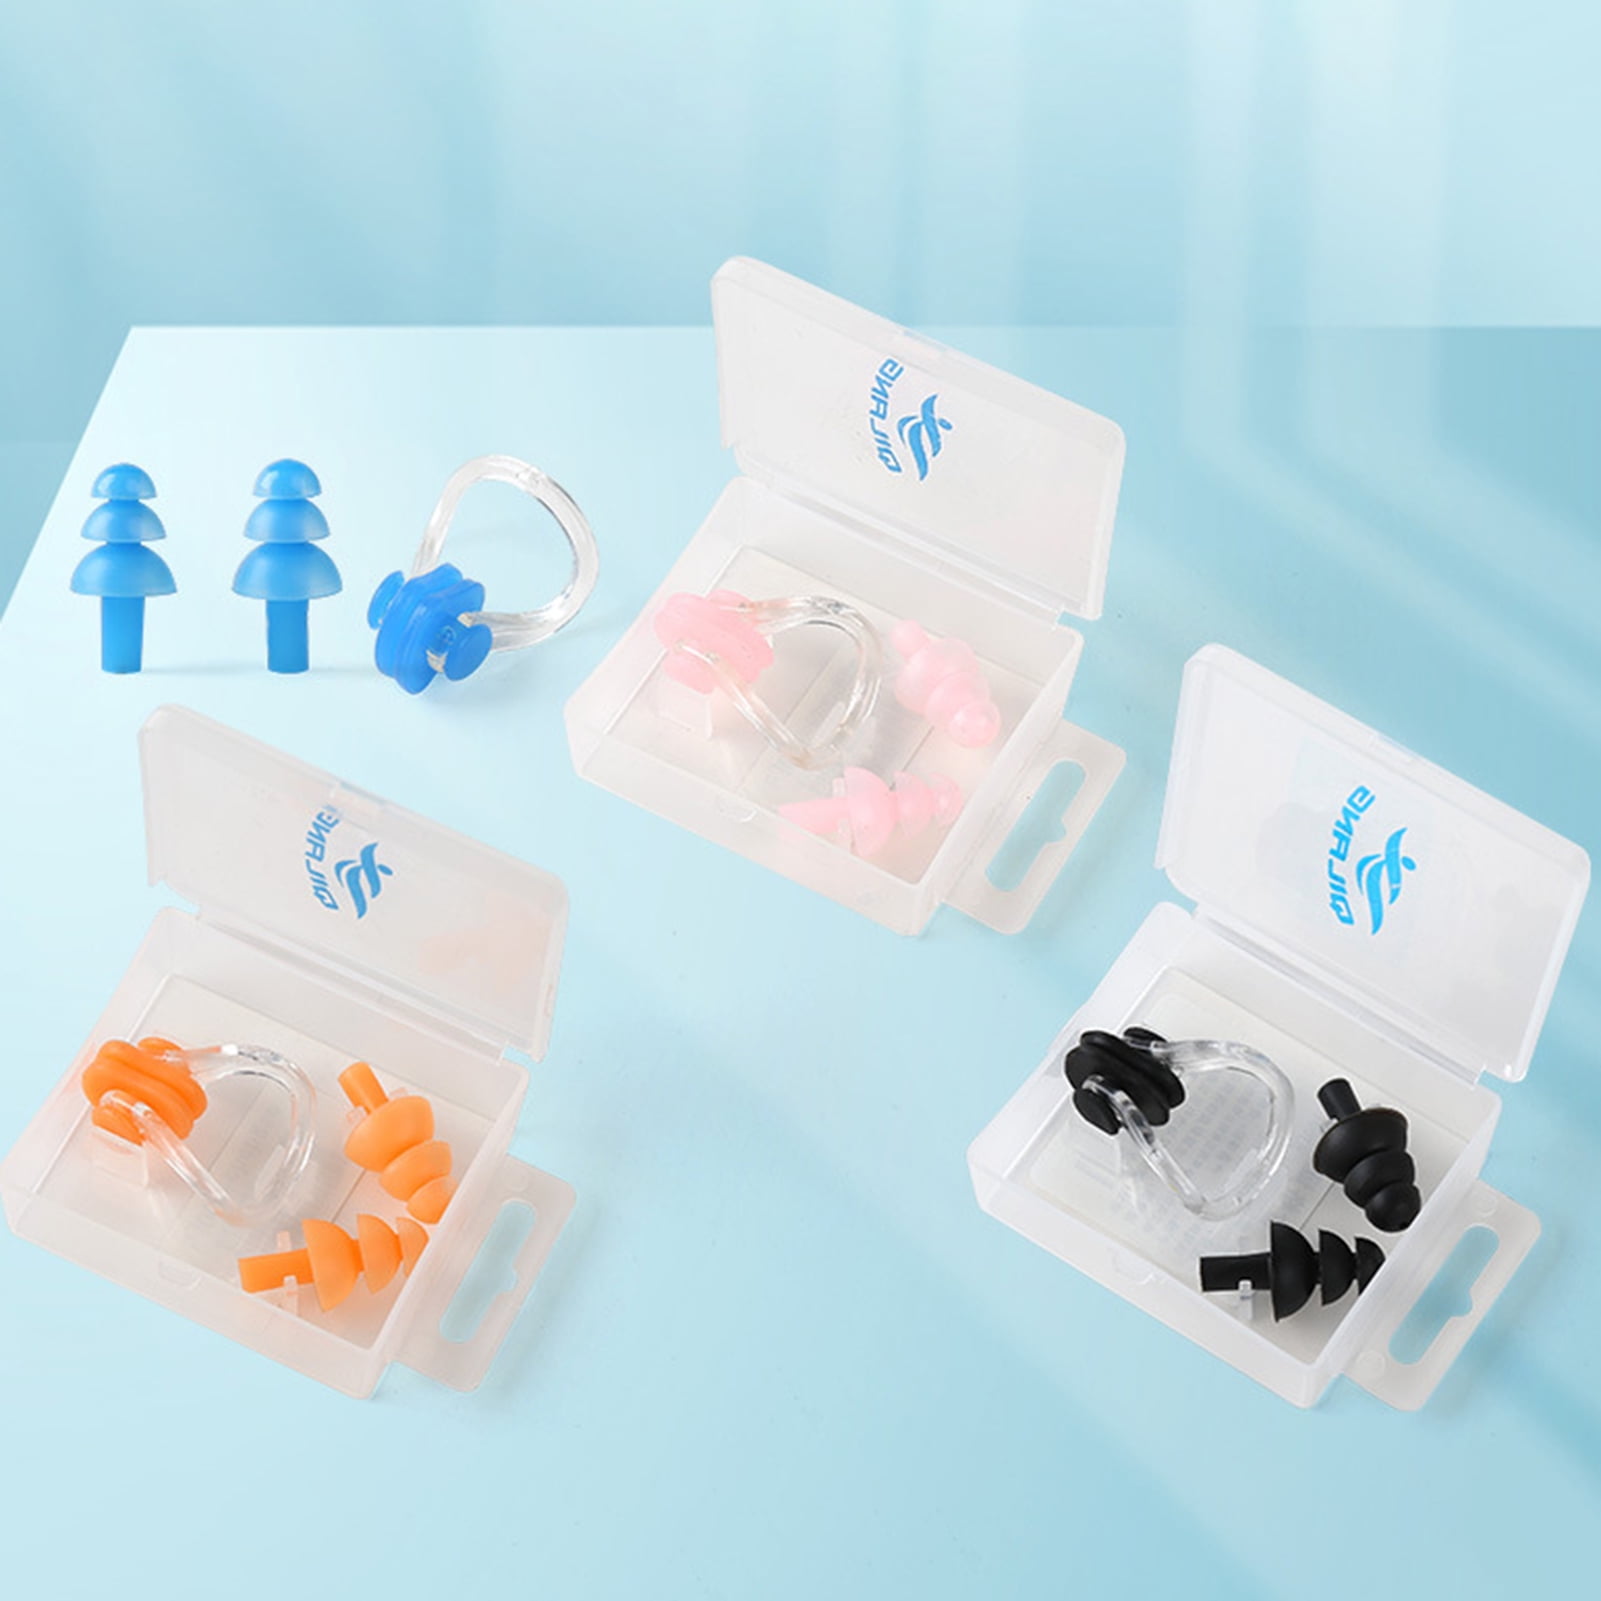 Swim Ear plugs and Nose Clip Set by Utopia Fitness